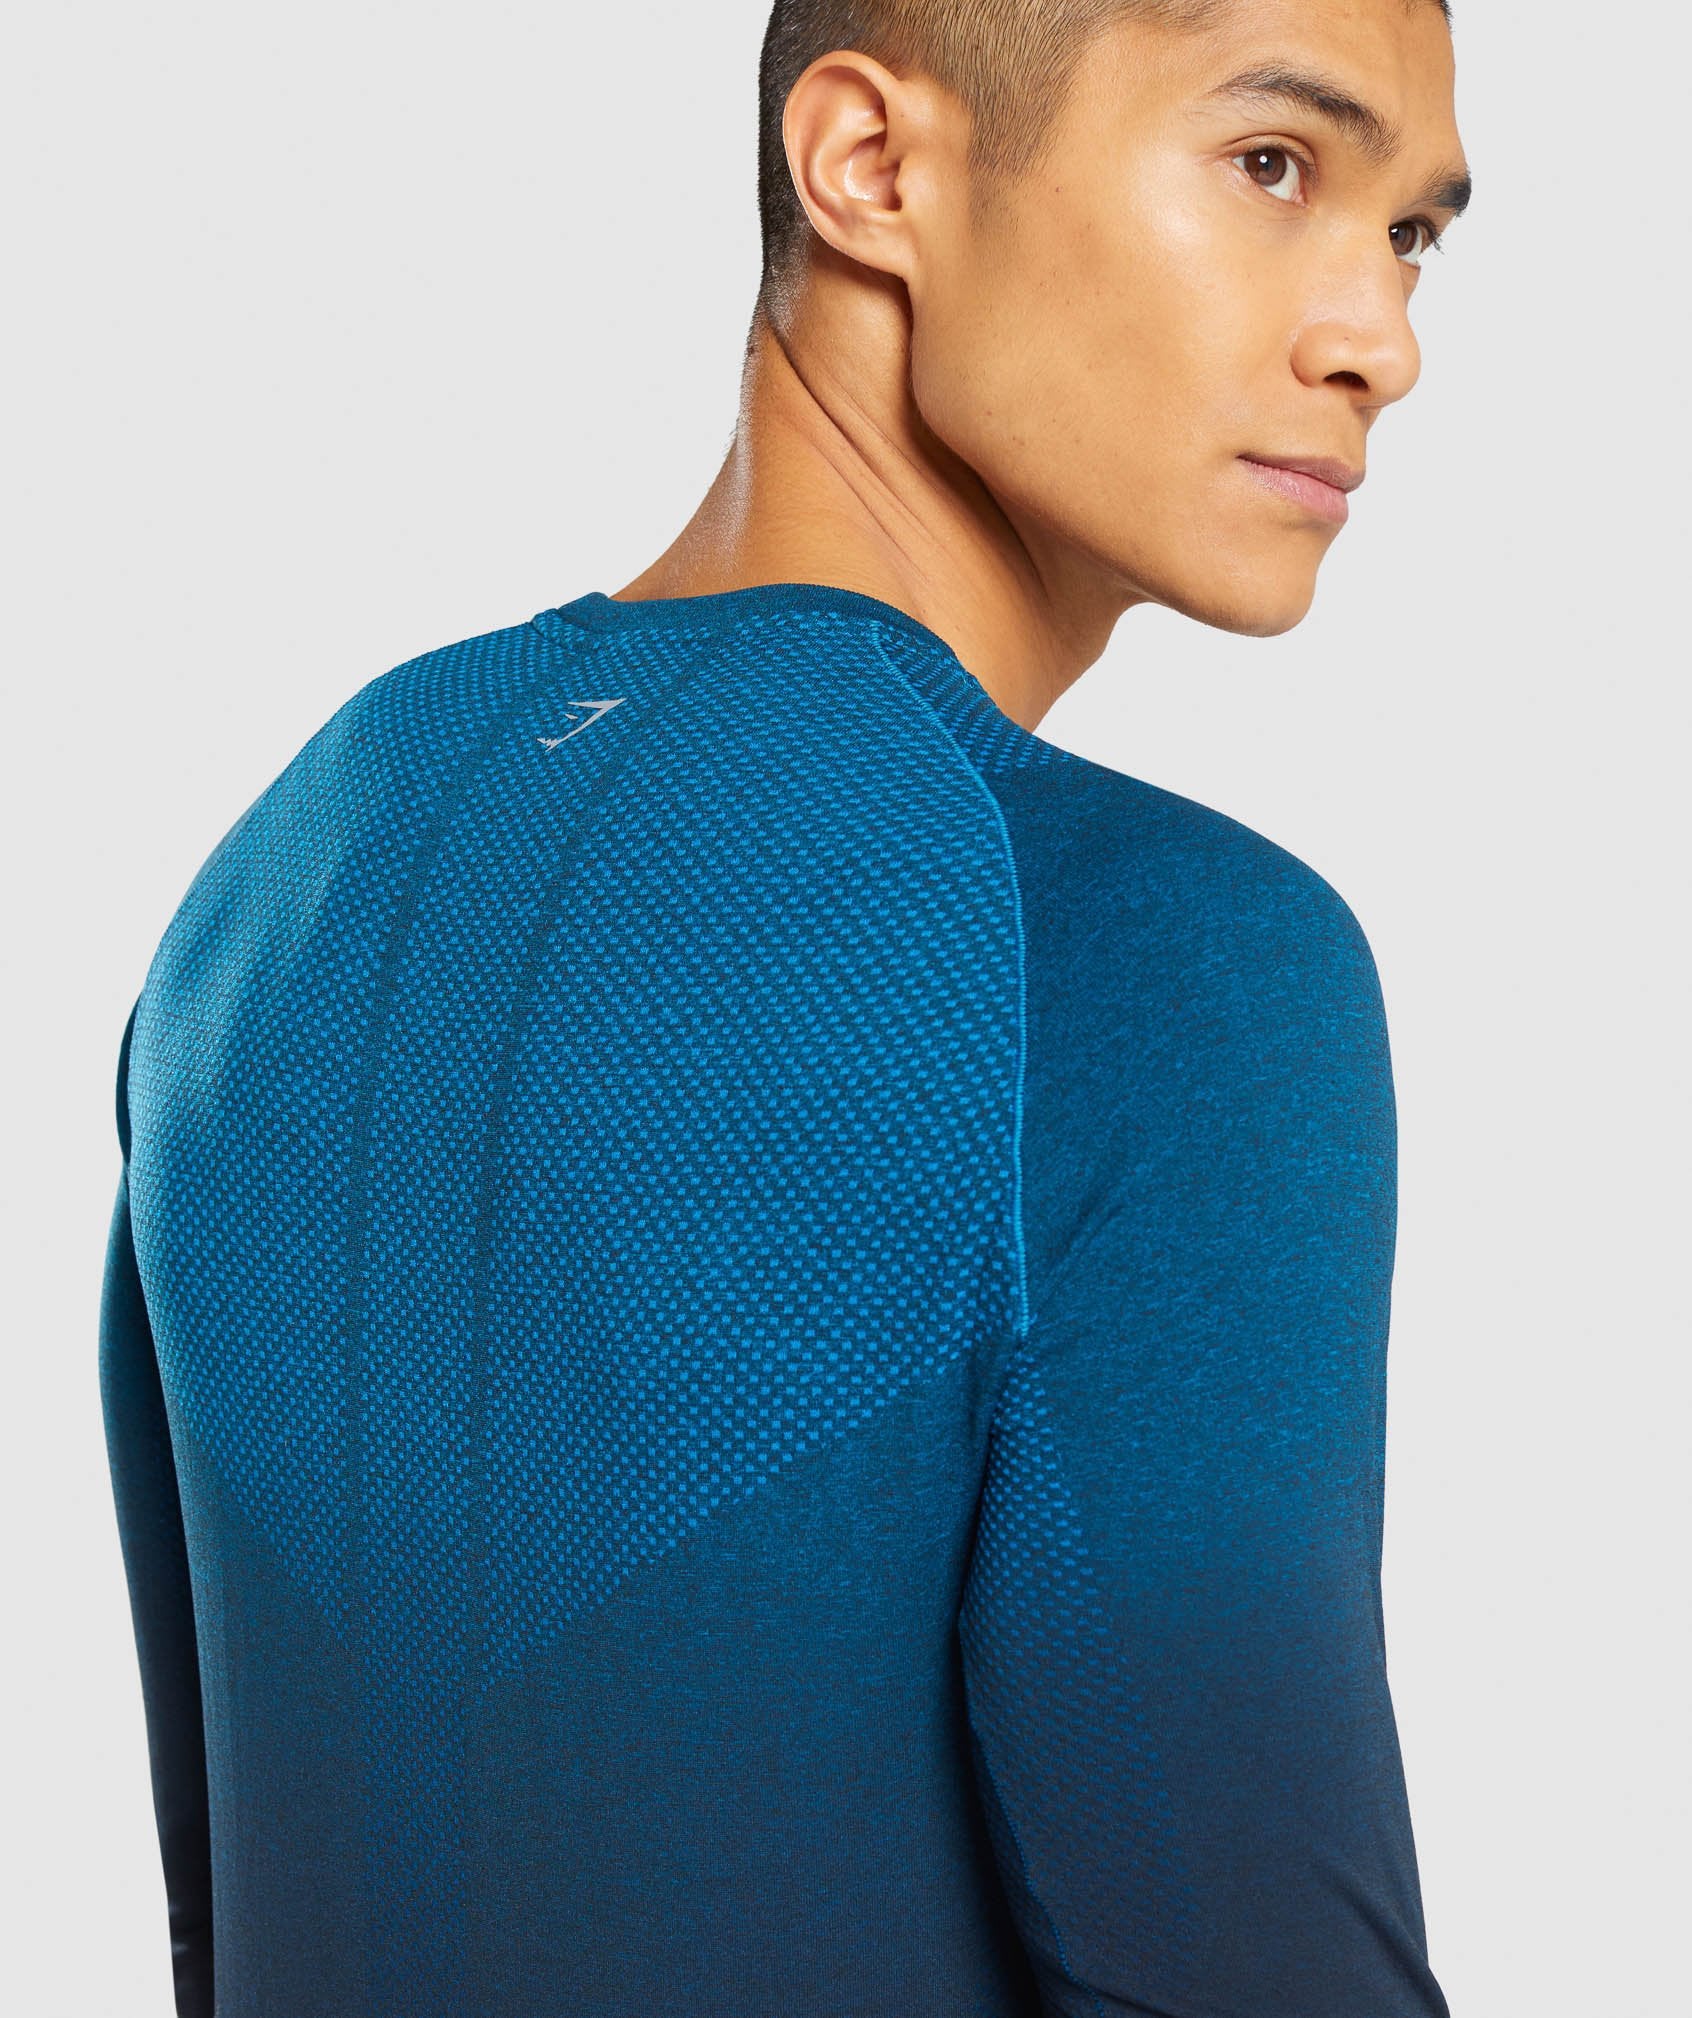 Vital Ombre Seamless Long Sleeve T-Shirt in Teal Marl/Black - view 6